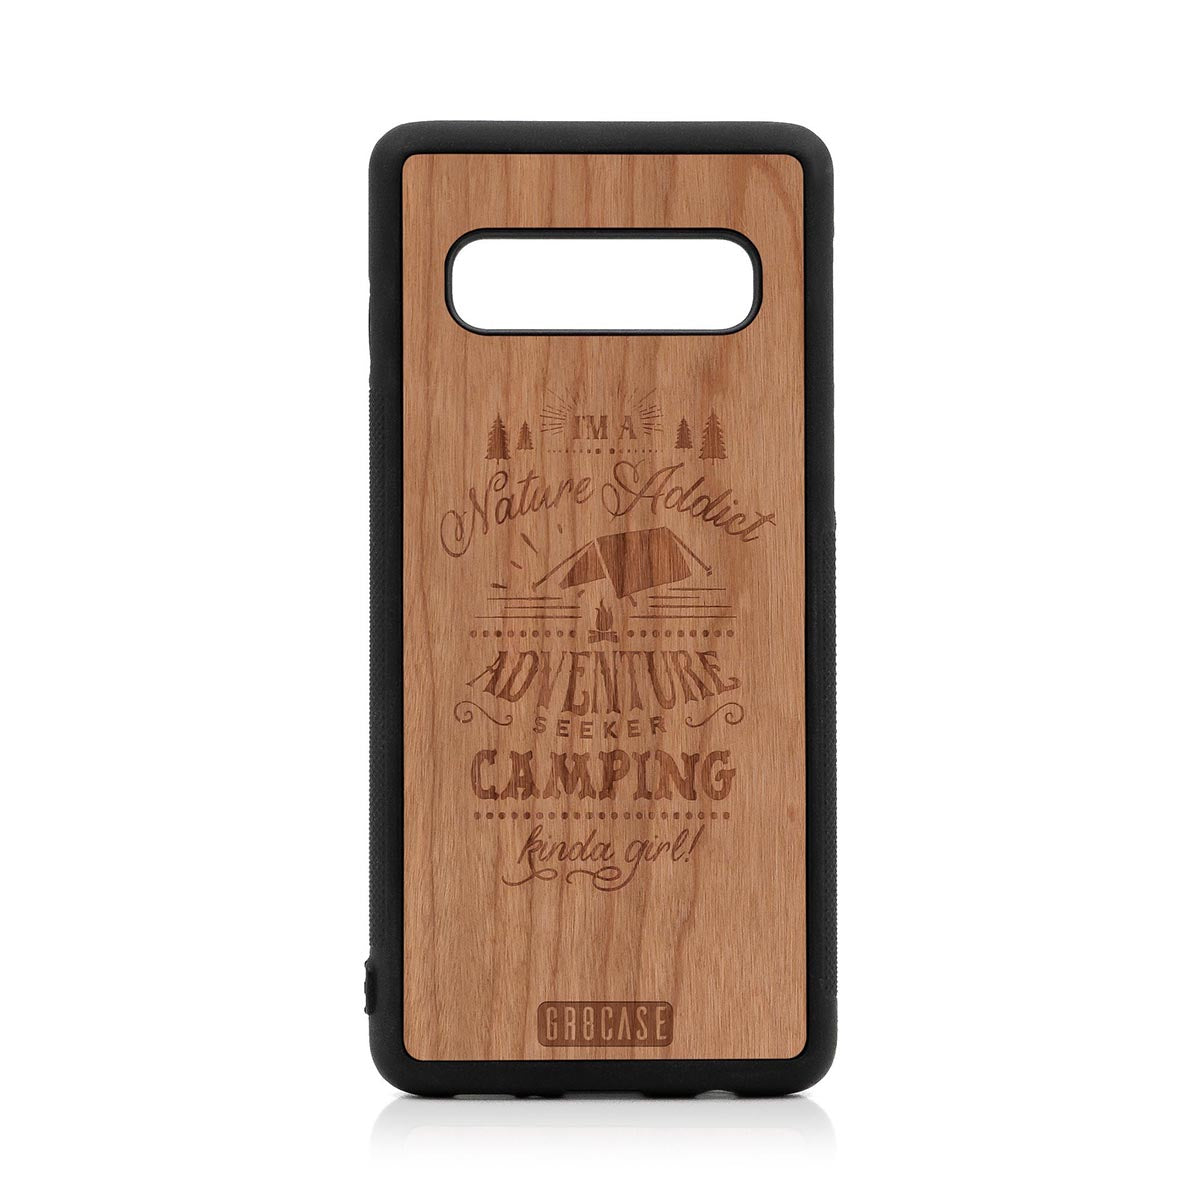 I'm A Nature Addict Adventure Seeker Camping Kinda Girl Design Wood Case For Samsung Galaxy S10 by GR8CASE